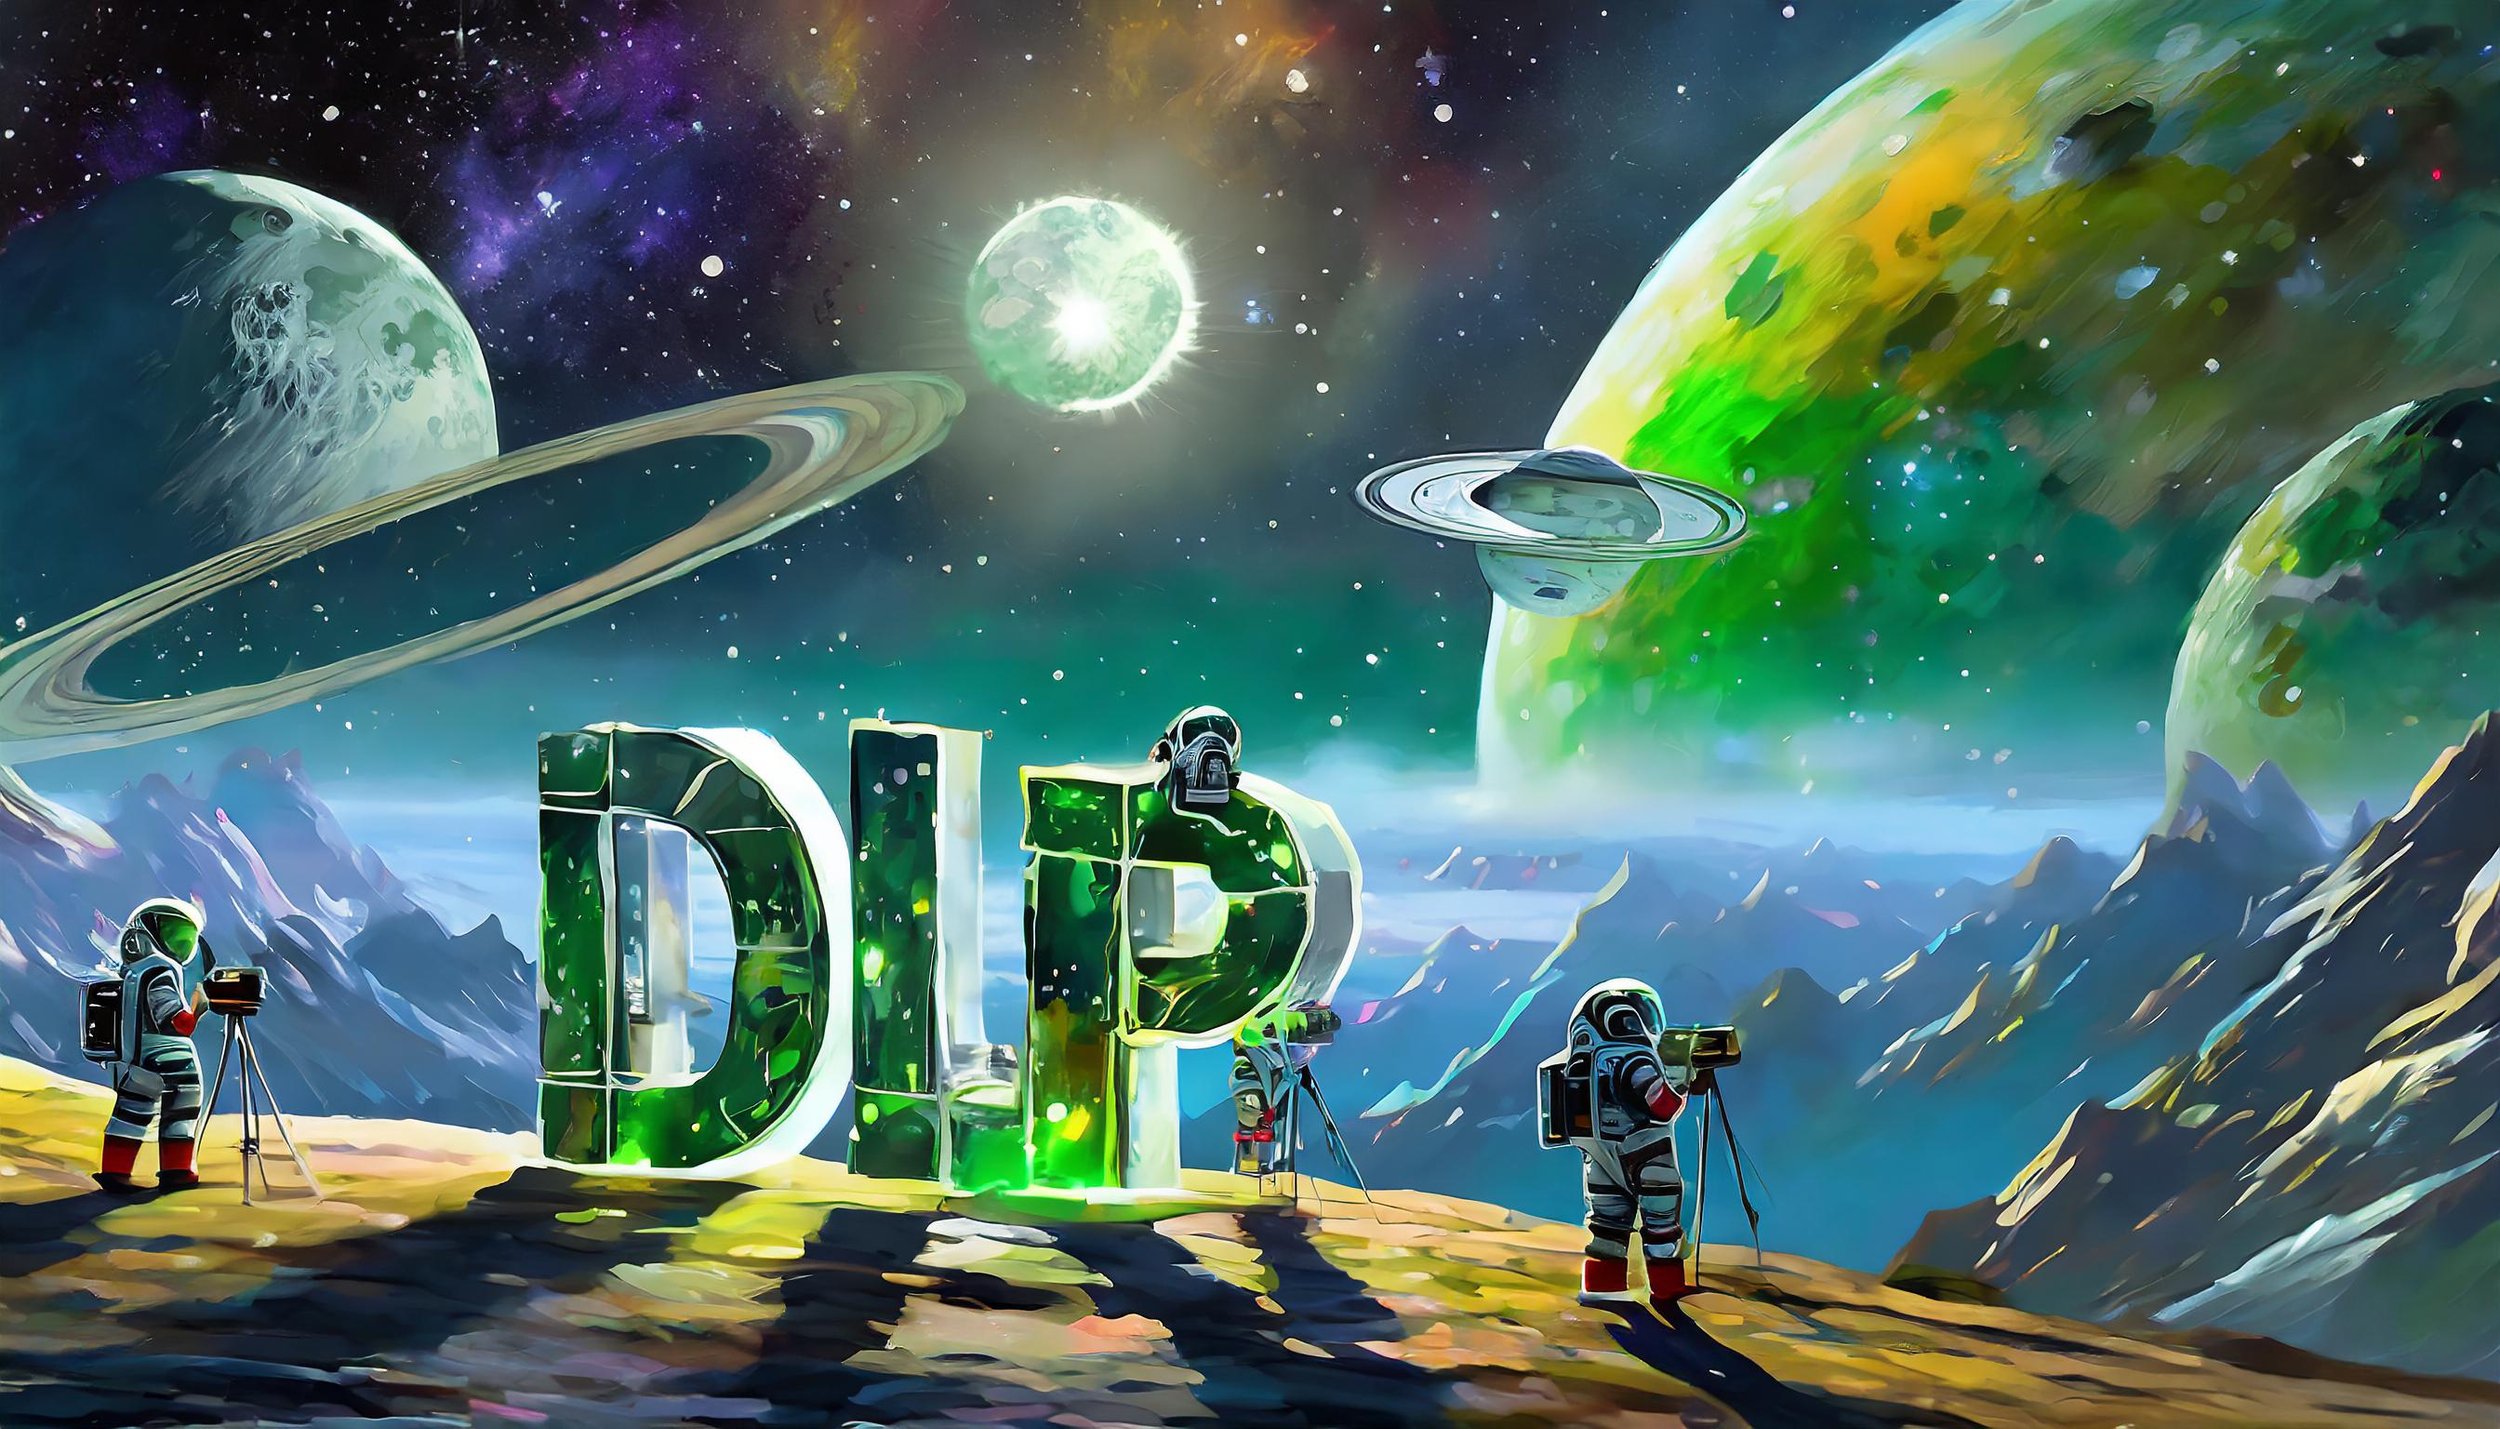 Firefly the large letters DLP, which are green in color , sit together on the moon in outer space. a.jpg